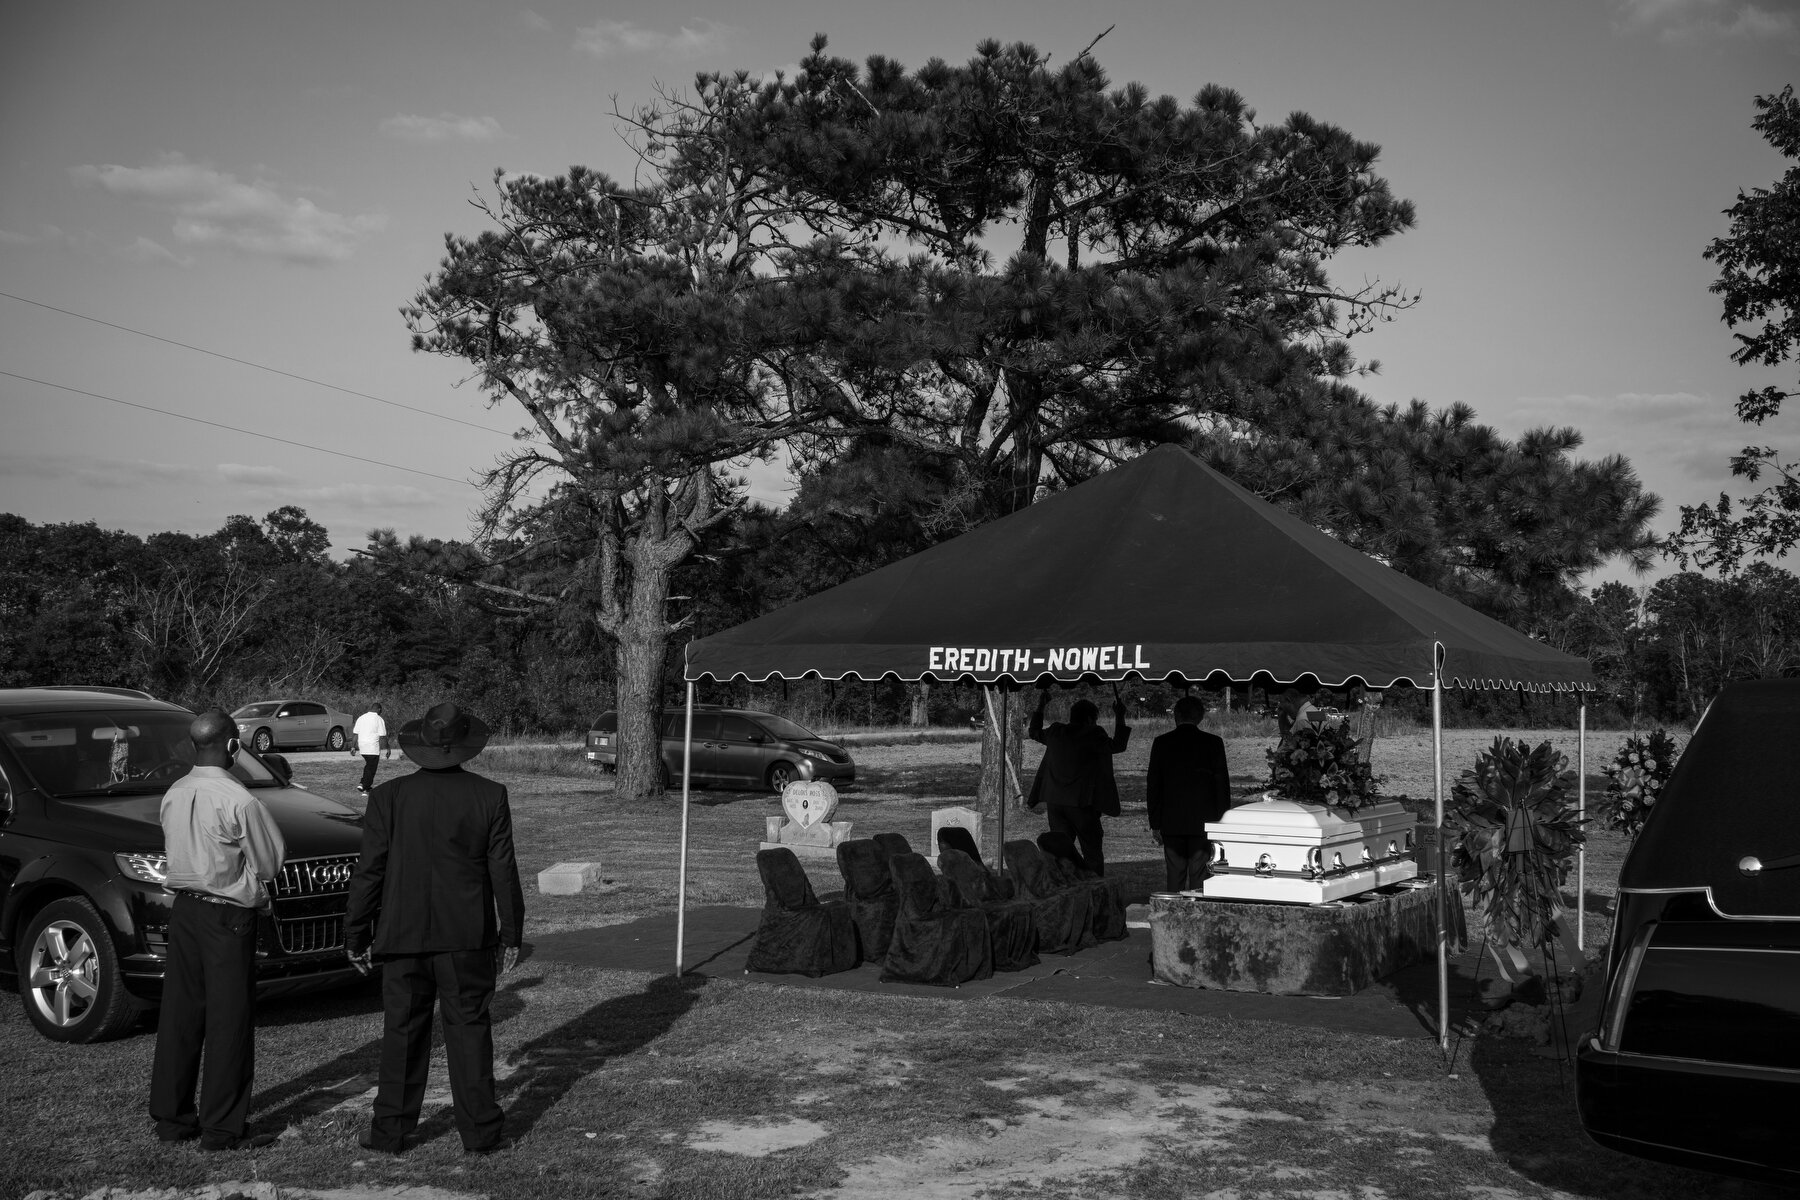  The casket containing the body of Esther Wortham, 84, sits under a tent after a graveside service at her family cemetery in Marks, MS. Wortham, a mother of 10 with 29 grandchildren, 28 great-grandchildren, and 3 great-great-grandchildren, died of CO